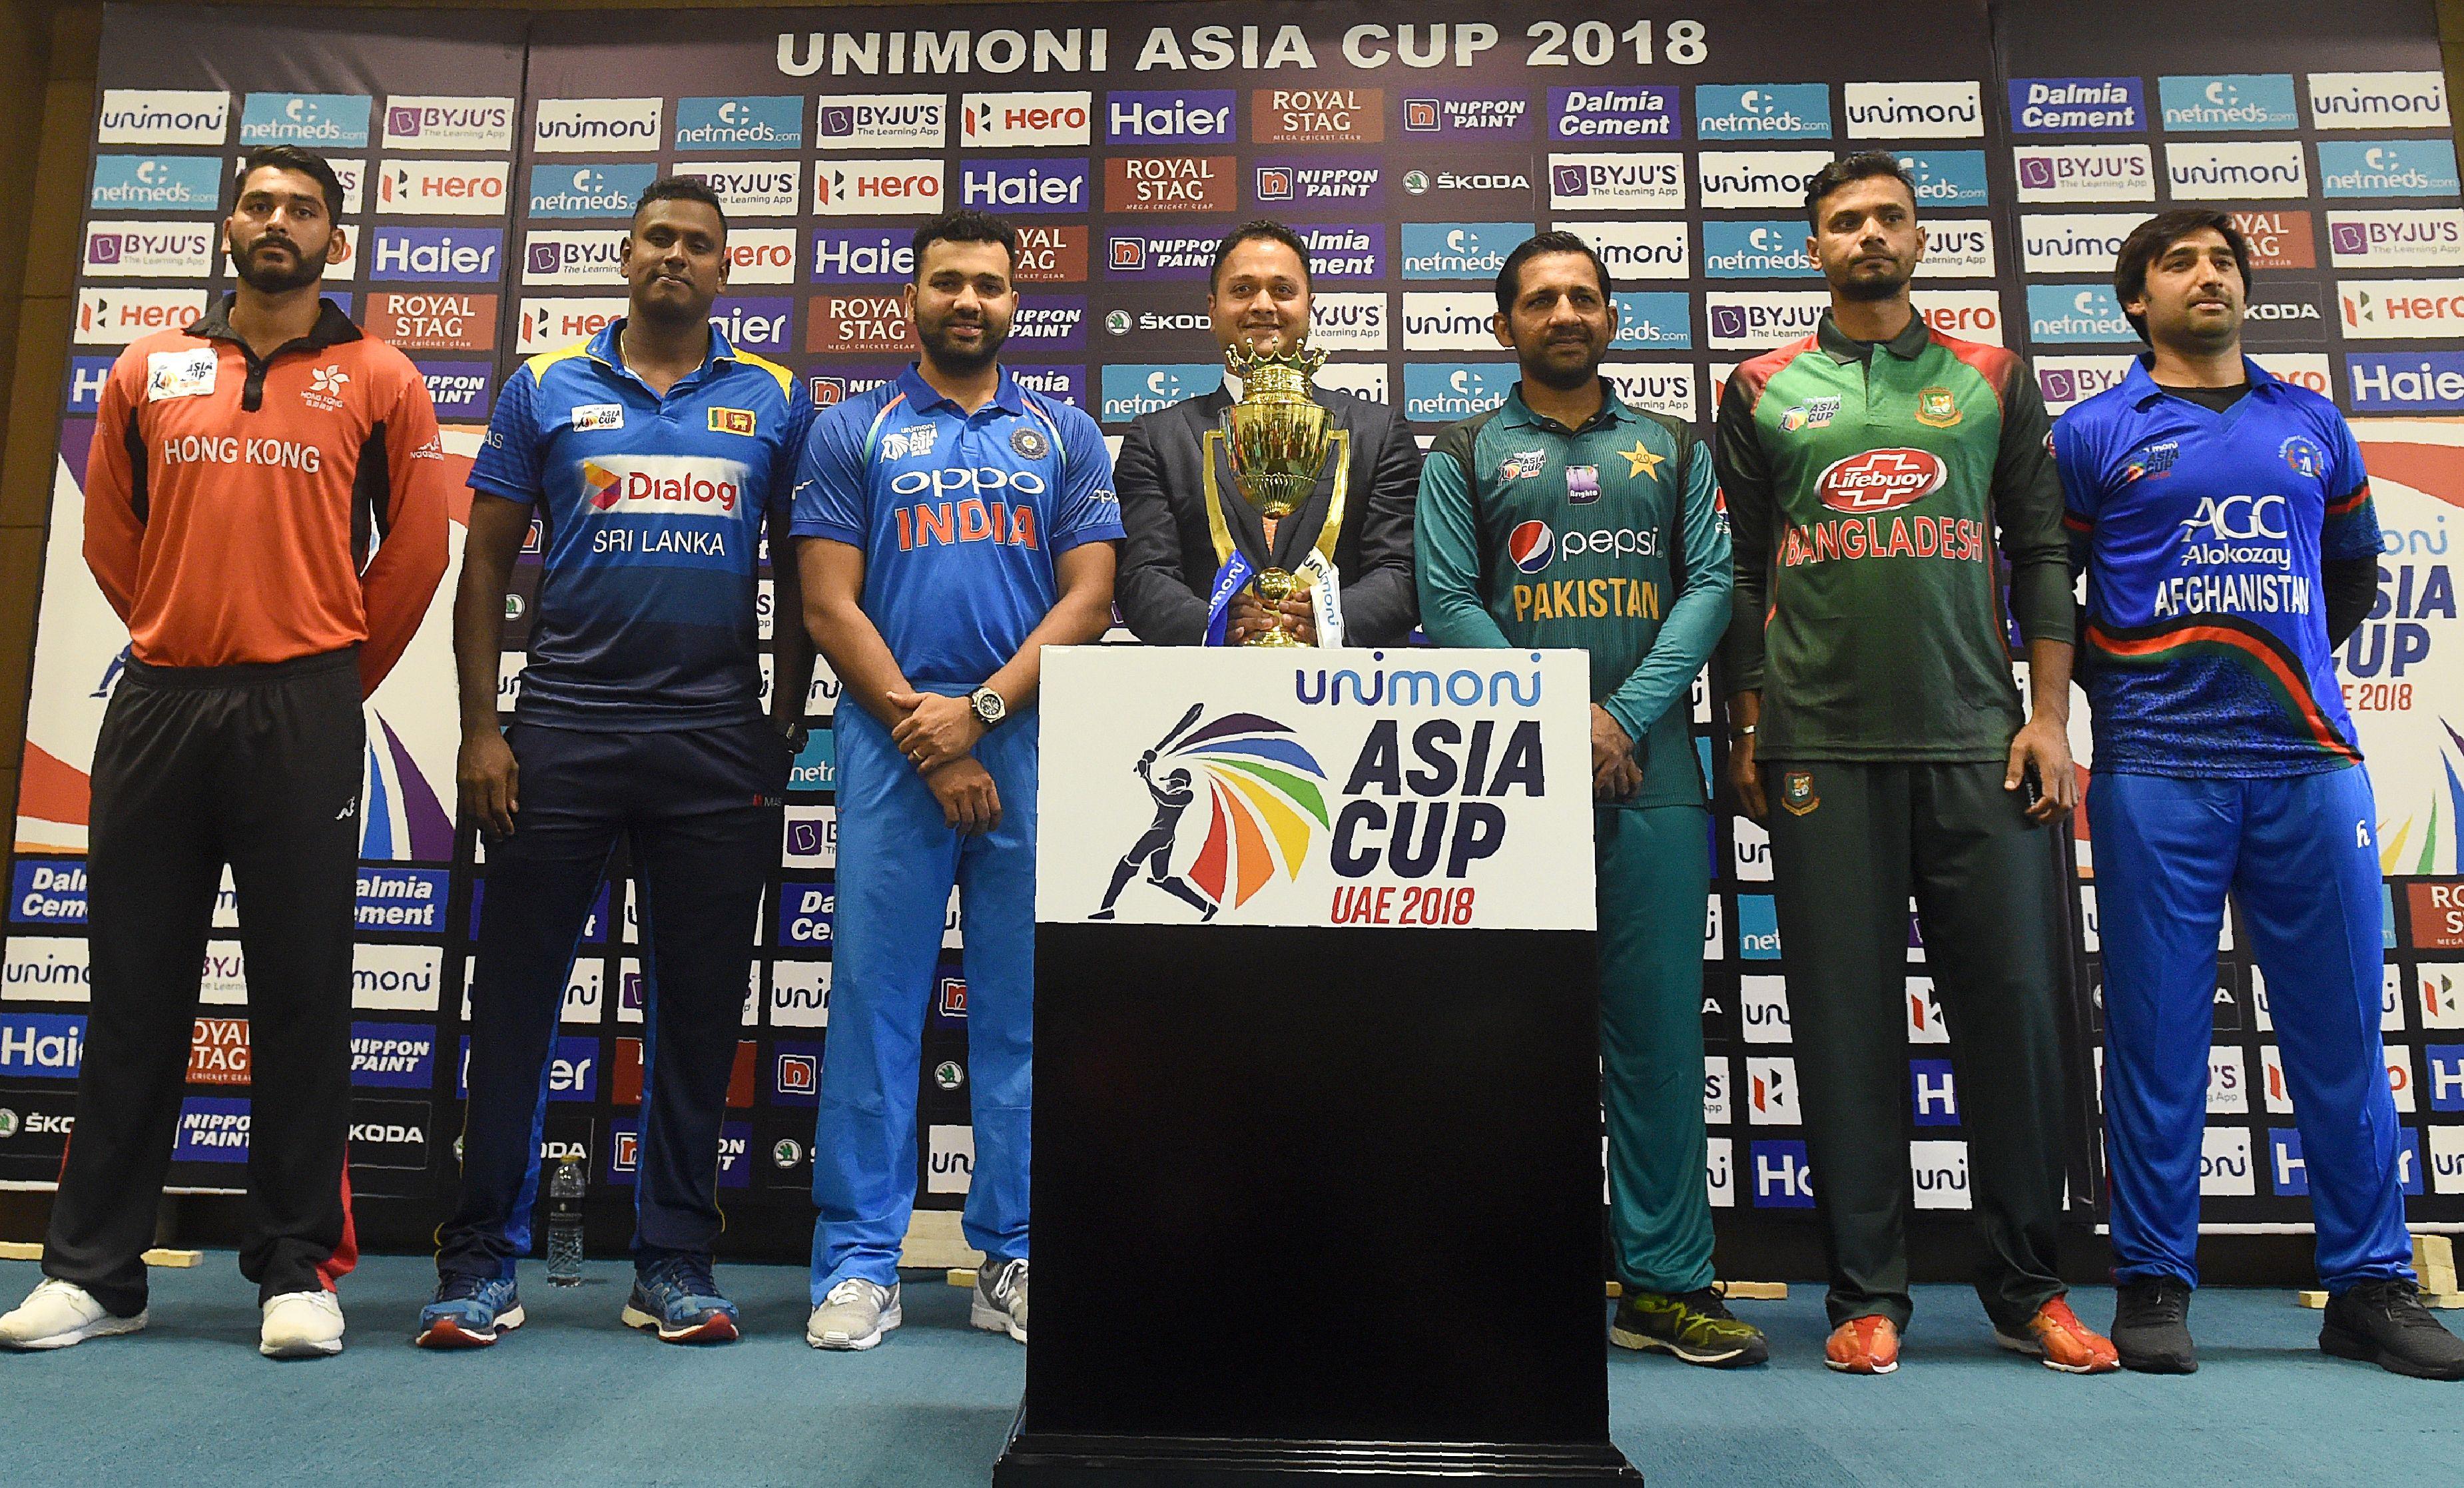 PCB granted rights for 2020 Asia Cup